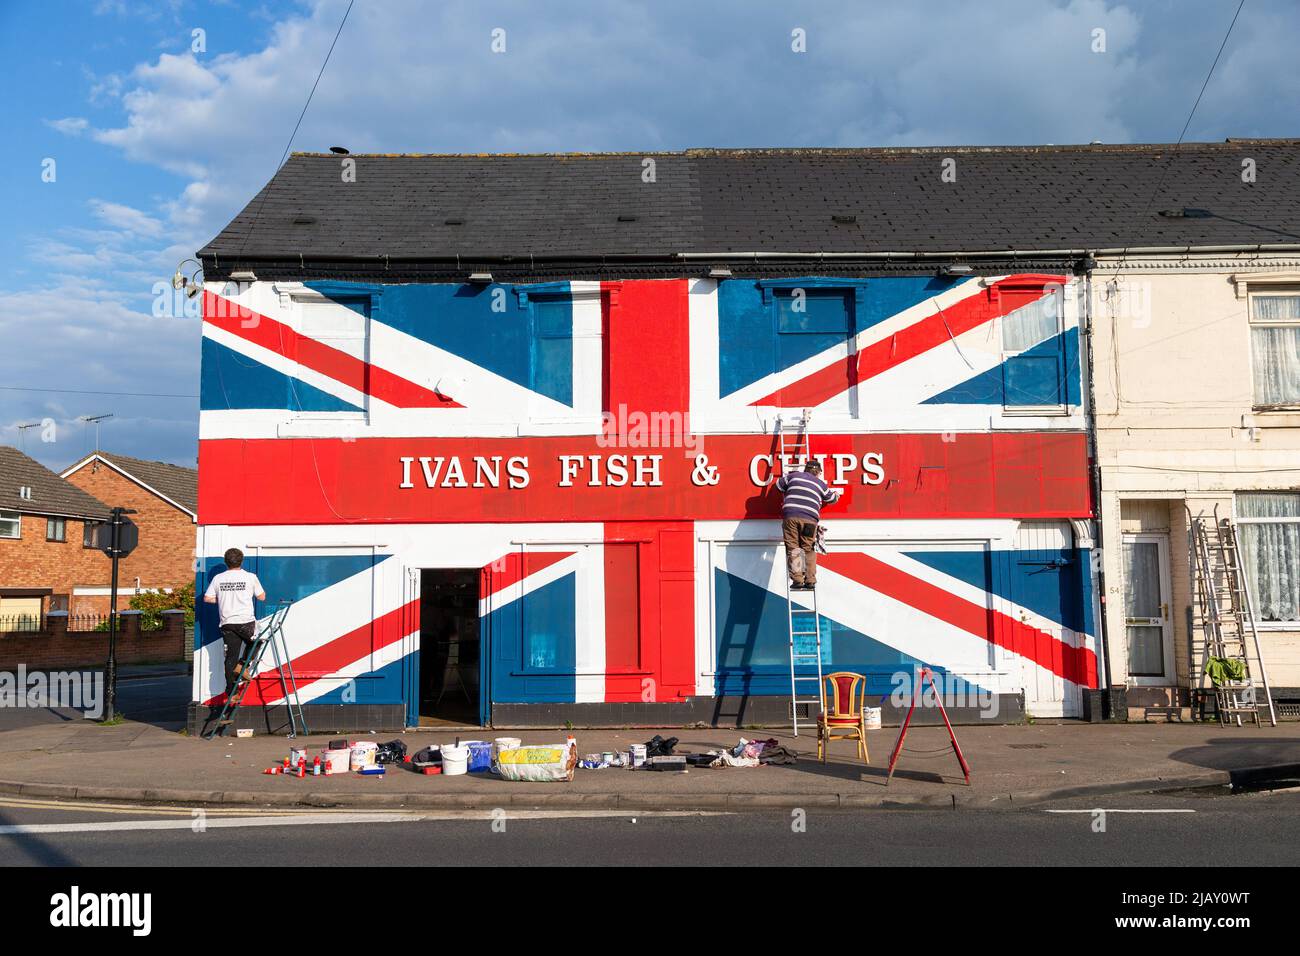 Cradley Heath, West Midlands, UK. 1st June, 2022. Chip shop proprietor Warren Rudge puts the finishing touches onto the Union Jackflag he and his son James have painted on their fish and chip shop in Cradley Heath, West Midlands. The painted flag covers the whole of Ivan's Fish and Chips frontage including the windows, and has taken all day to complete. 'Ivan's Fish and Chips has been serving fish and chips for 65 years - not quite as long as Her Majesty though. But I have heard that The Queen is partial to fish and chips.' says Warren. Credit: Peter Lopeman/Alamy Live News Stock Photo